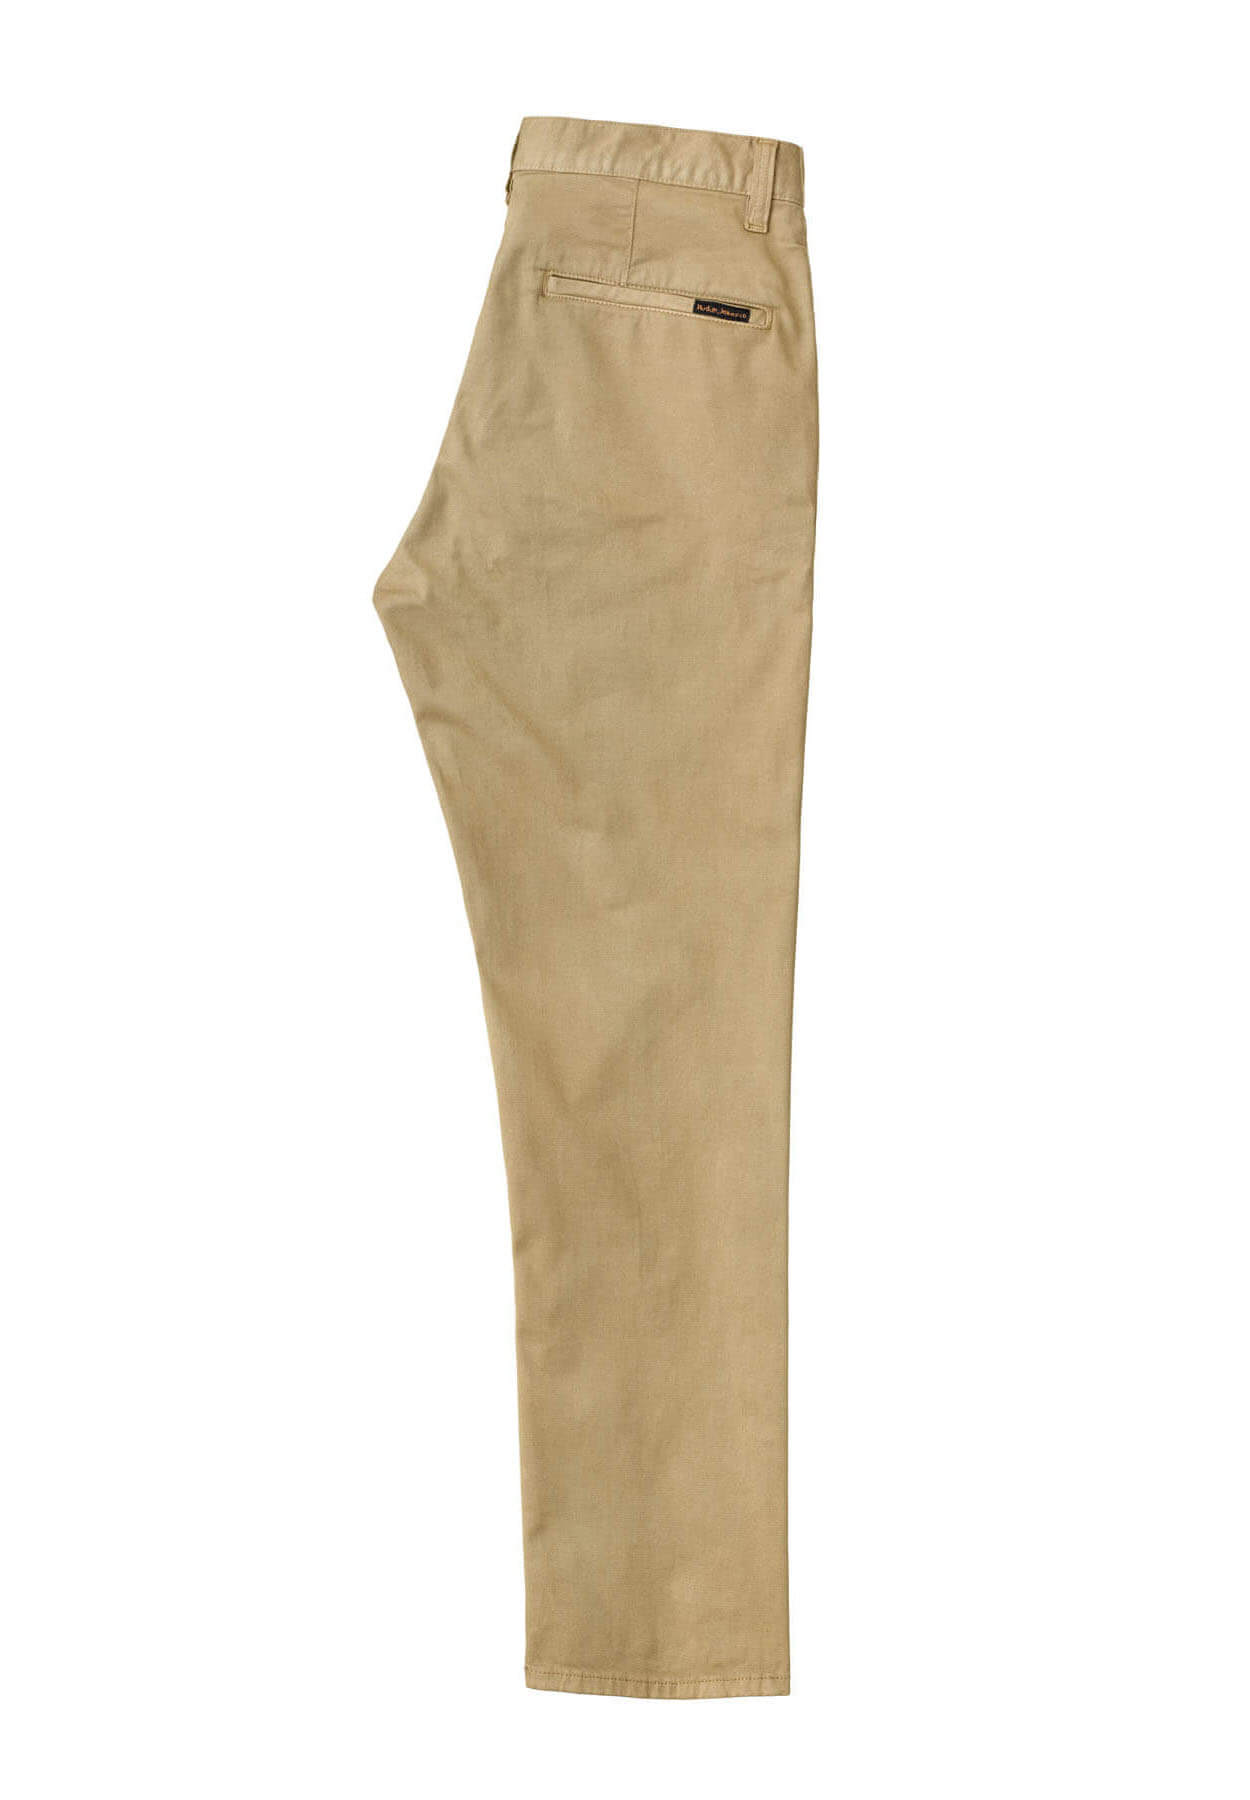 NUDIE JEANS Chinohose Easy Alvin Beige 32/32